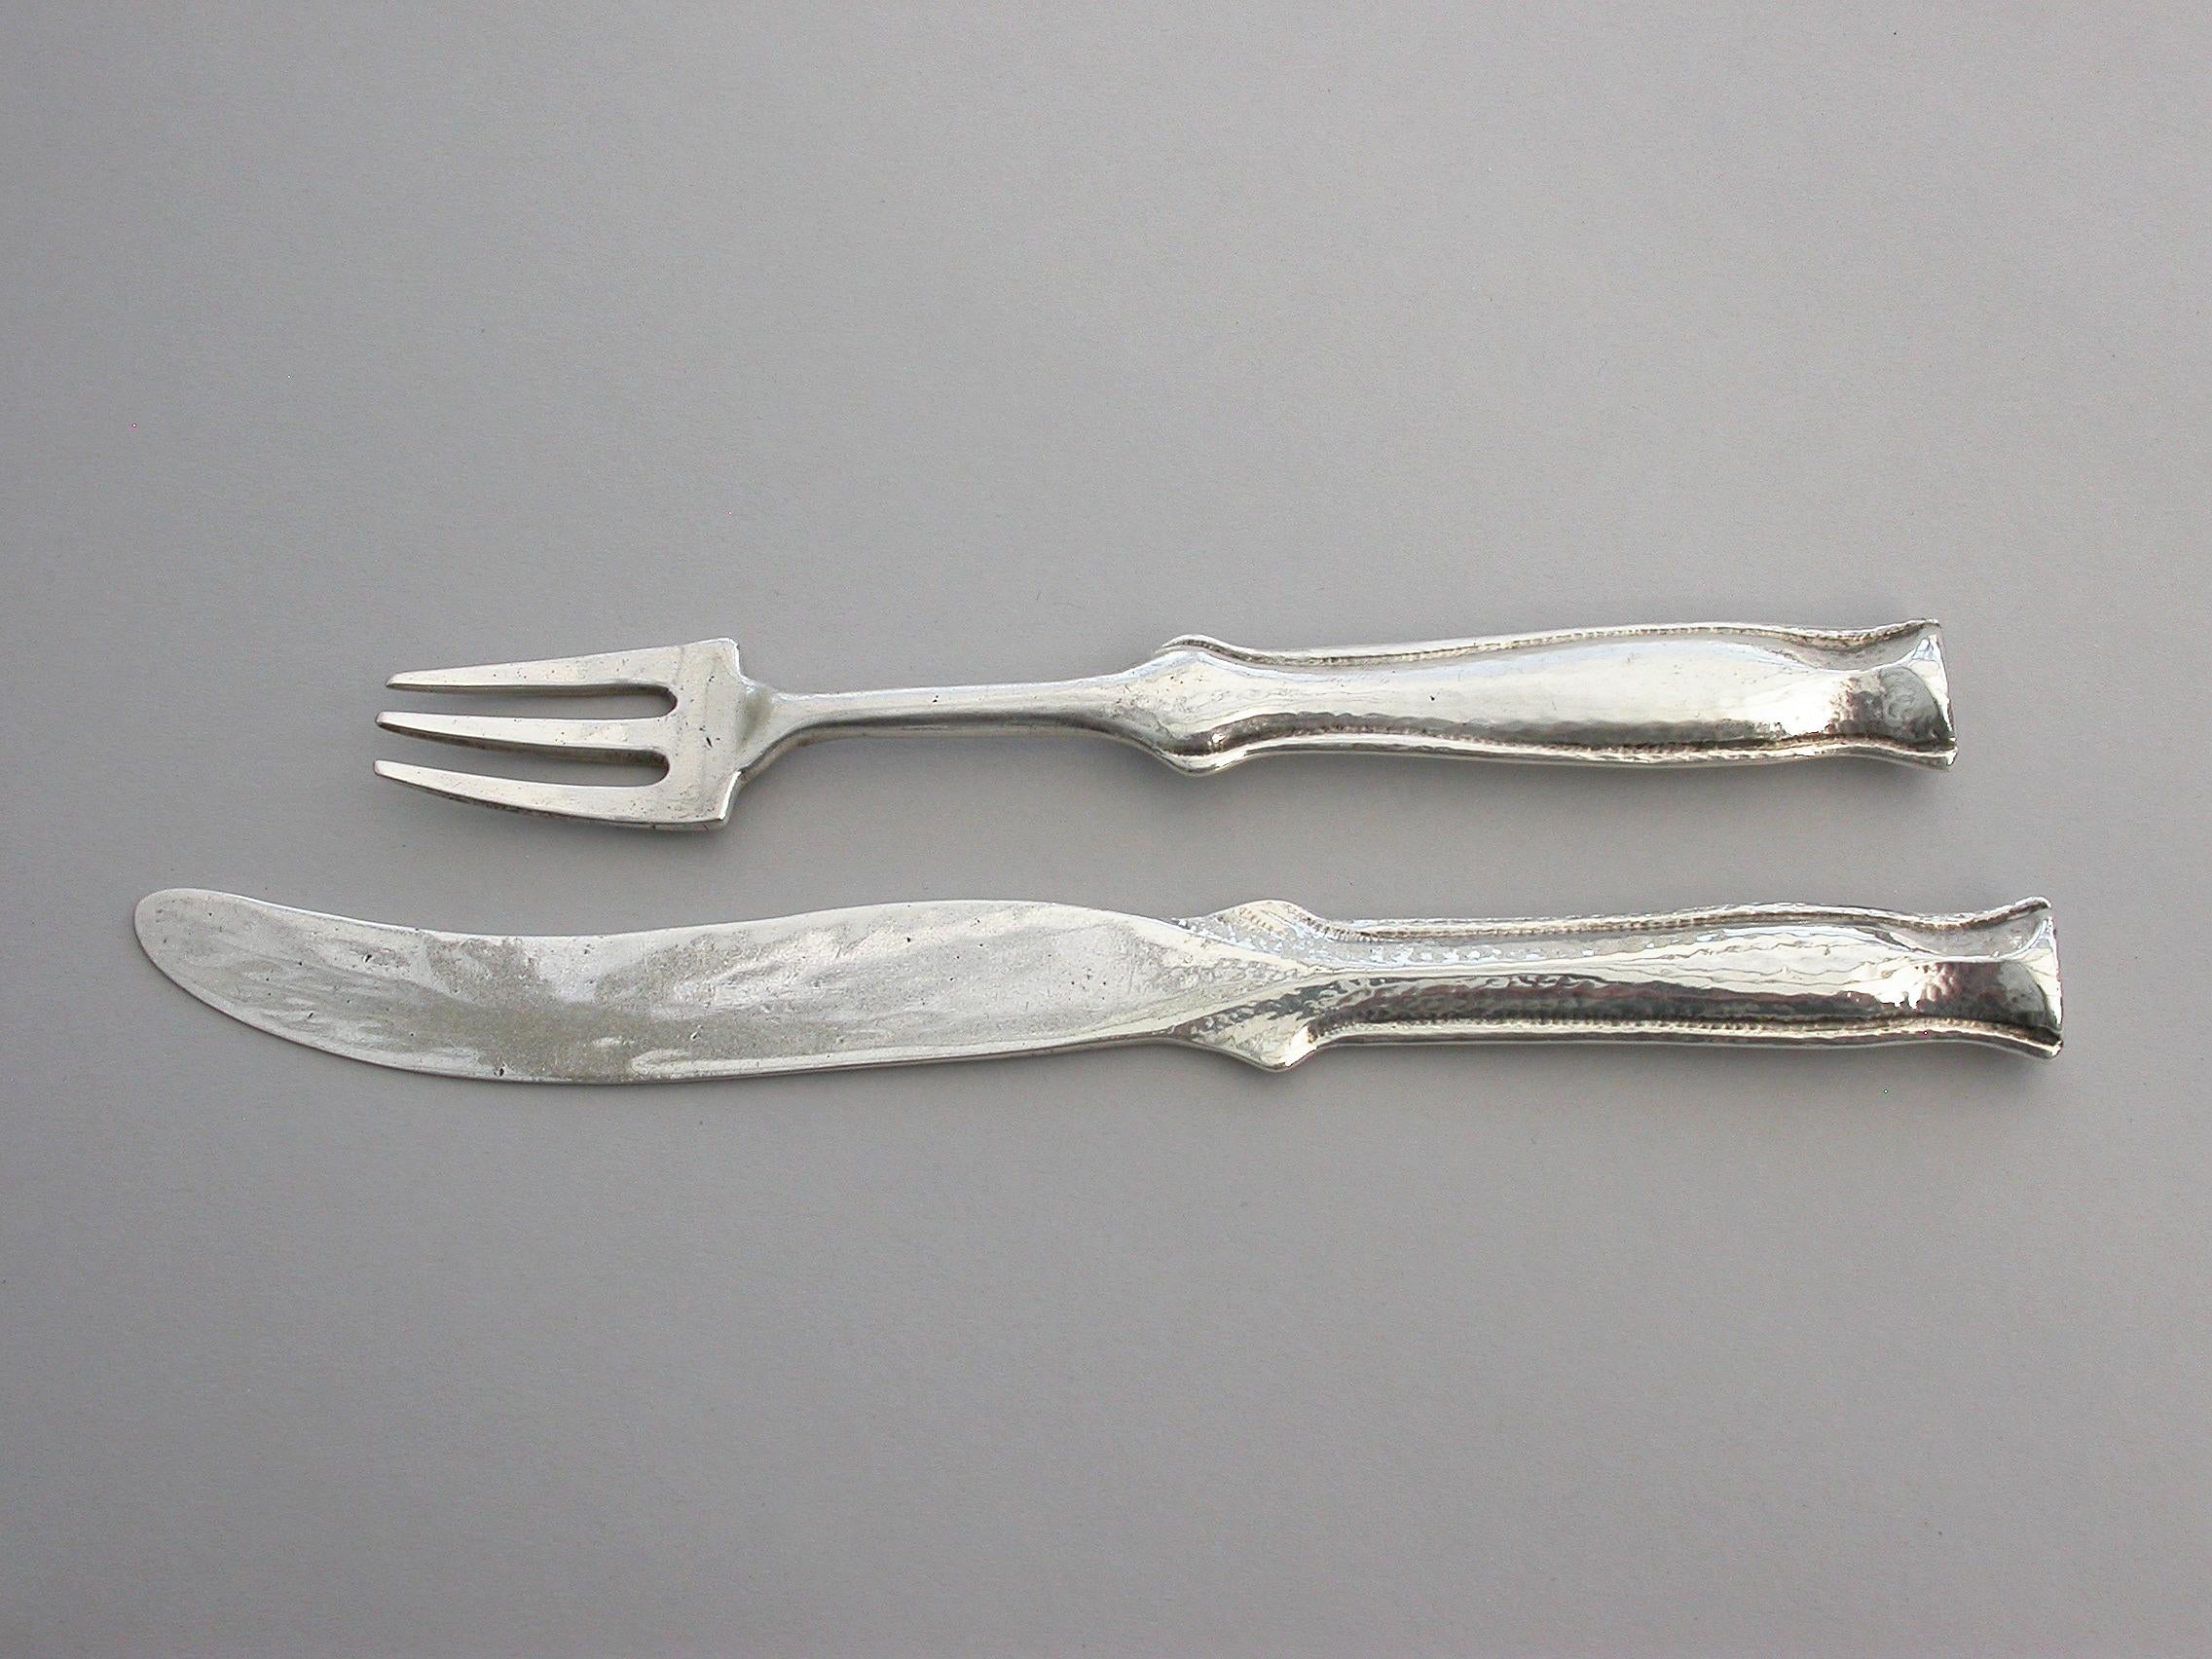 A pair of early 20th century Arts & Crafts silver dessert knife and fork with hammered finish and of a very heavy gauge, the shaped handles with flat nail head finials.

By Ramsden & Carr, London, 1913

Fork 157 mm long
Knife 190mm long

143